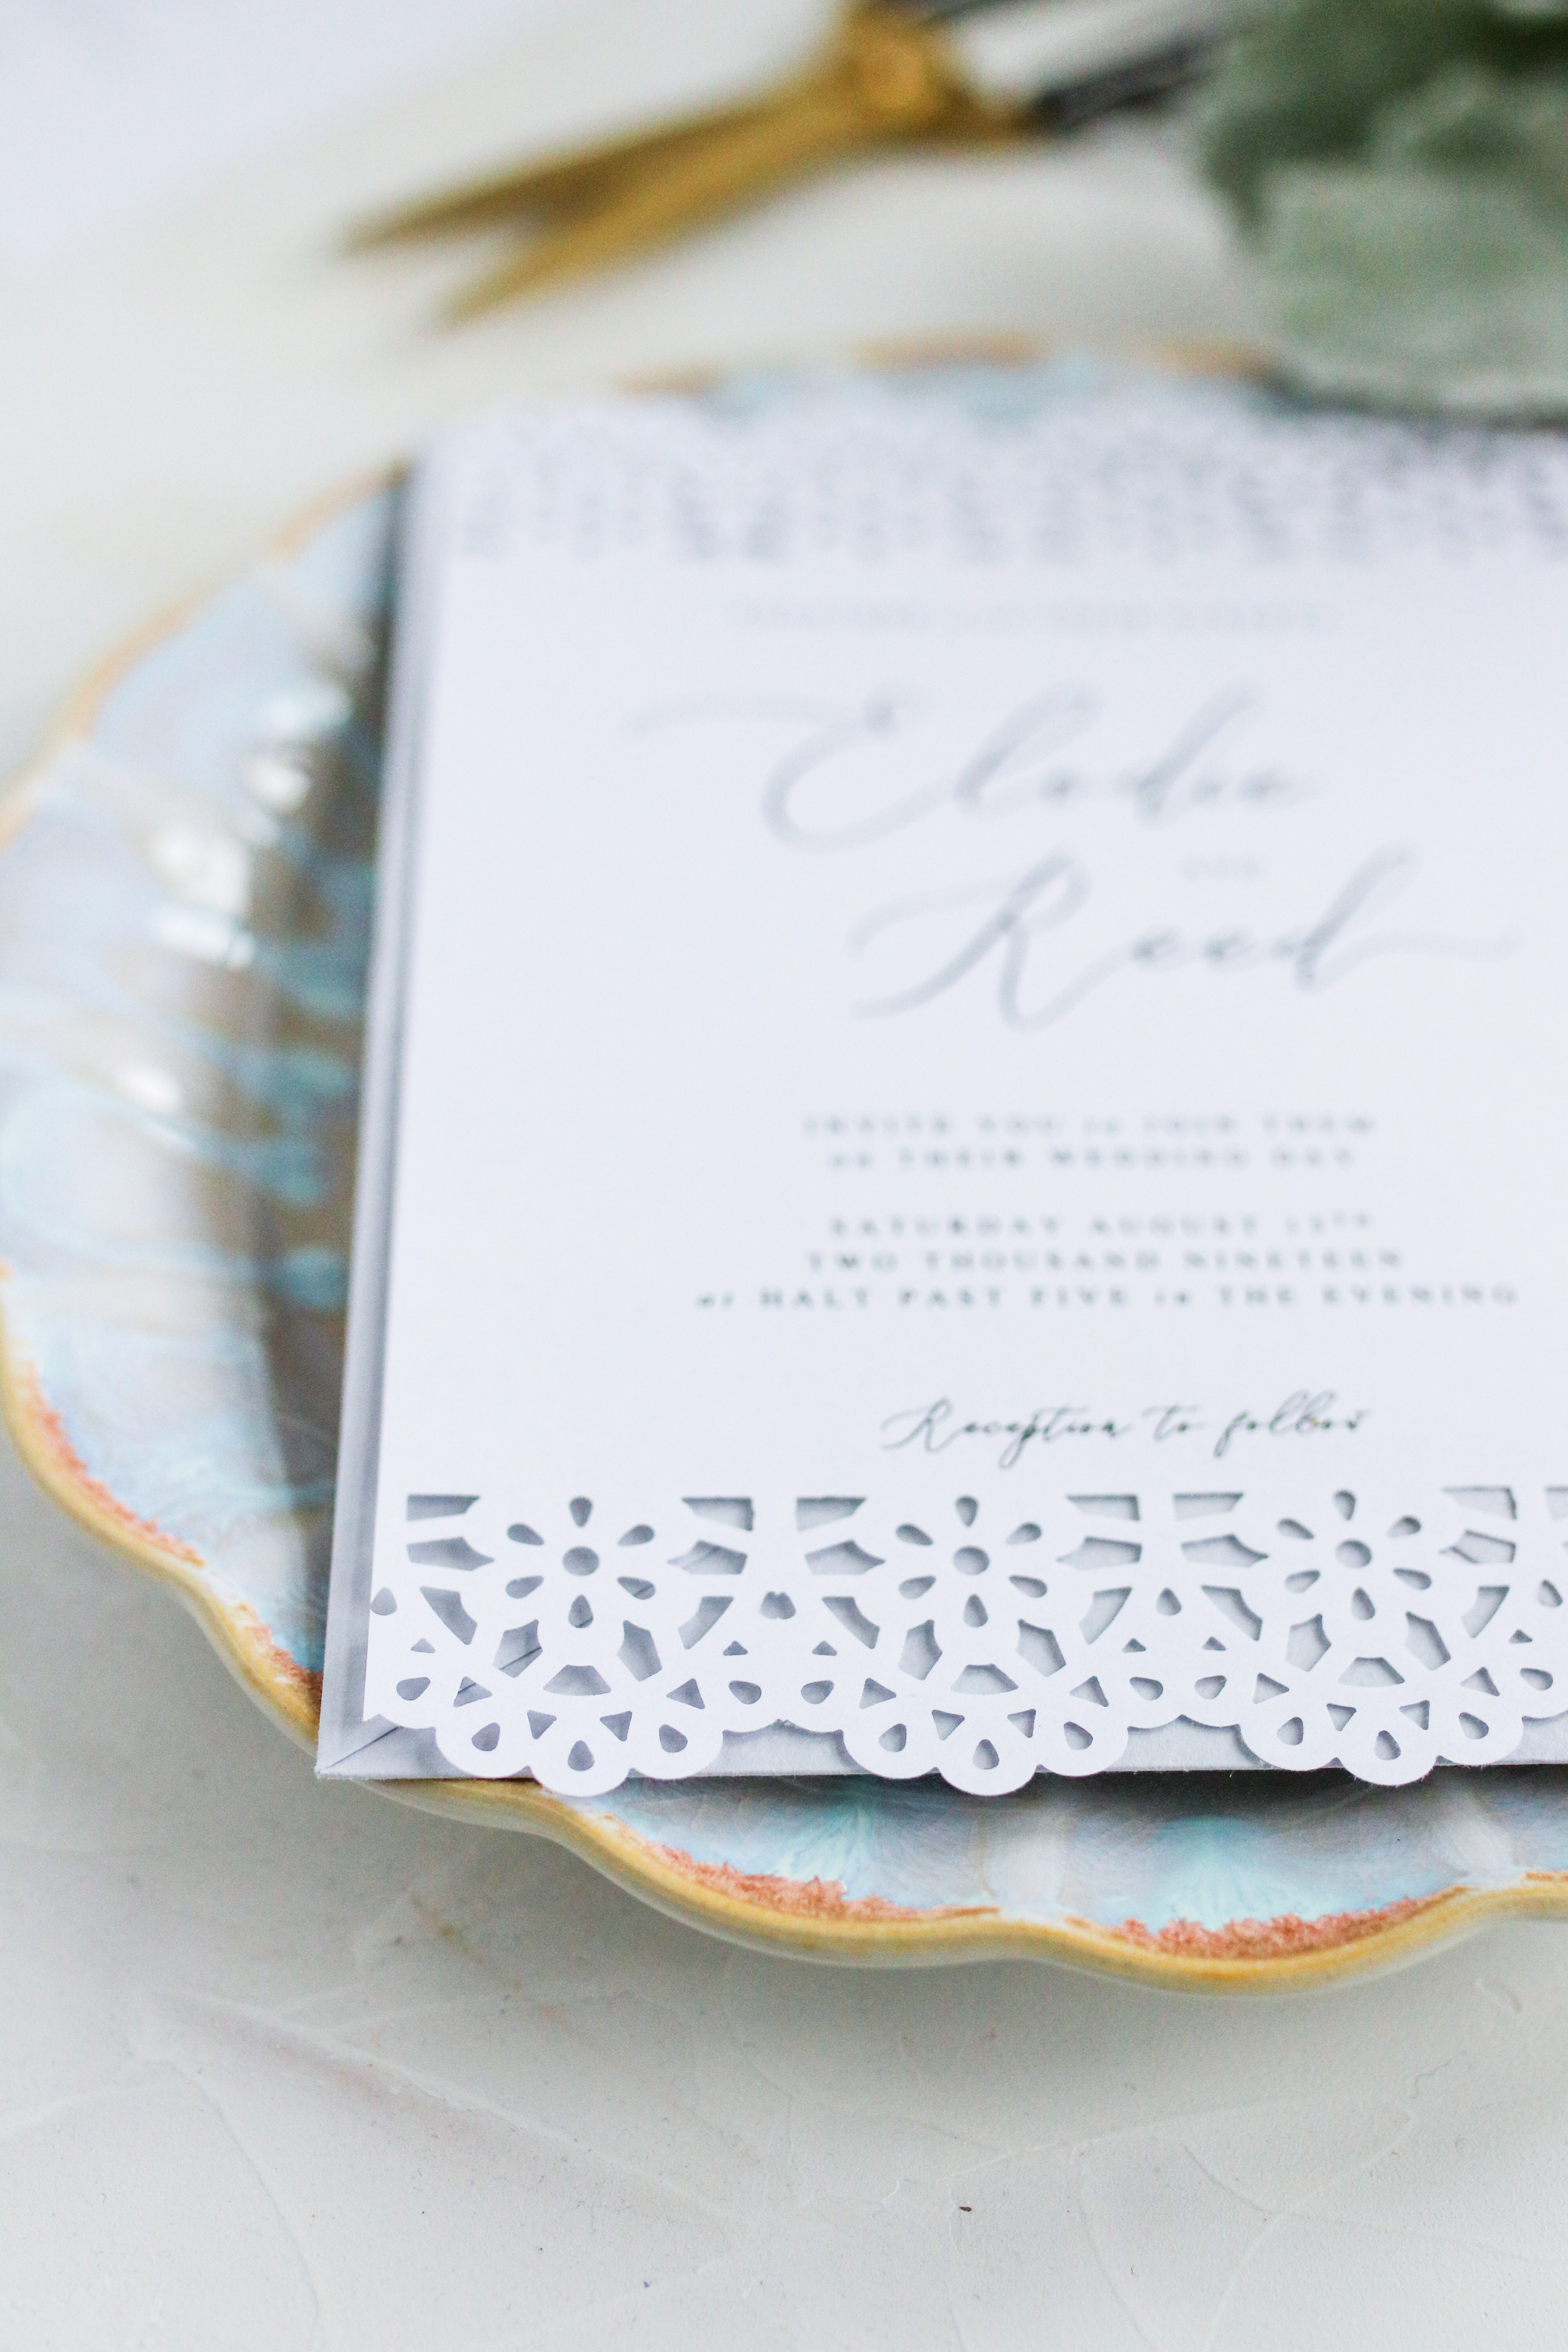 Details about   Laser cut wedding invitations,DIY invitations,Printable invitations_XCW5001 